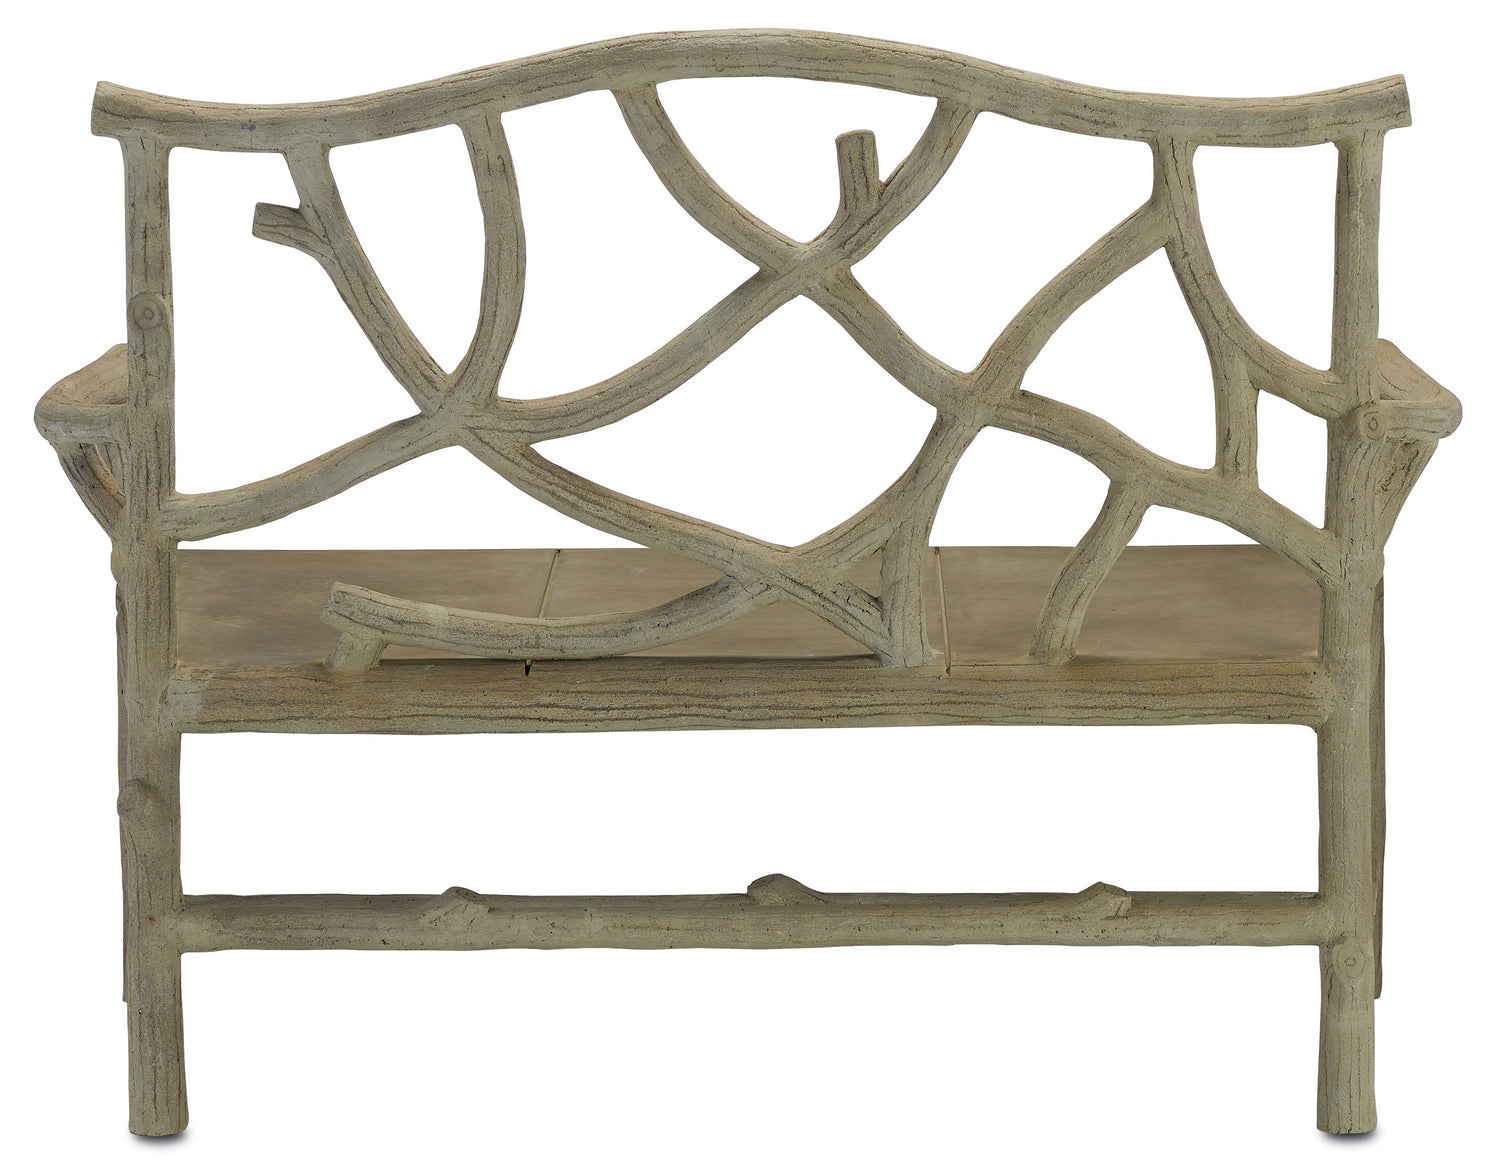 Bench from the Woodland collection in Portland/Faux Bois finish